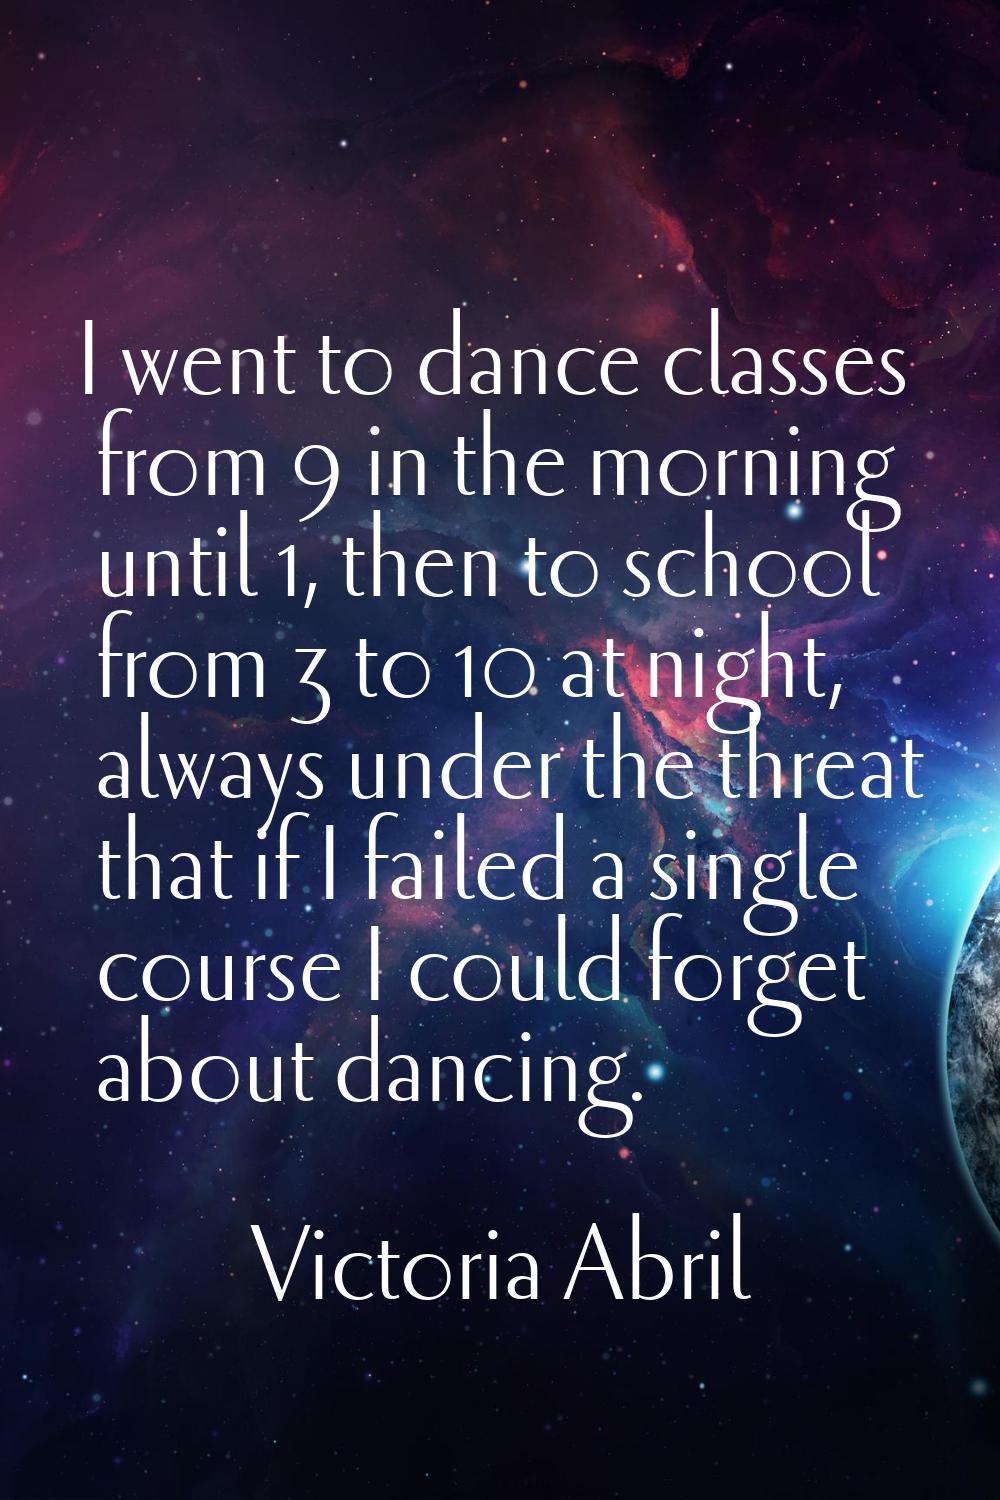 I went to dance classes from 9 in the morning until 1, then to school from 3 to 10 at night, always